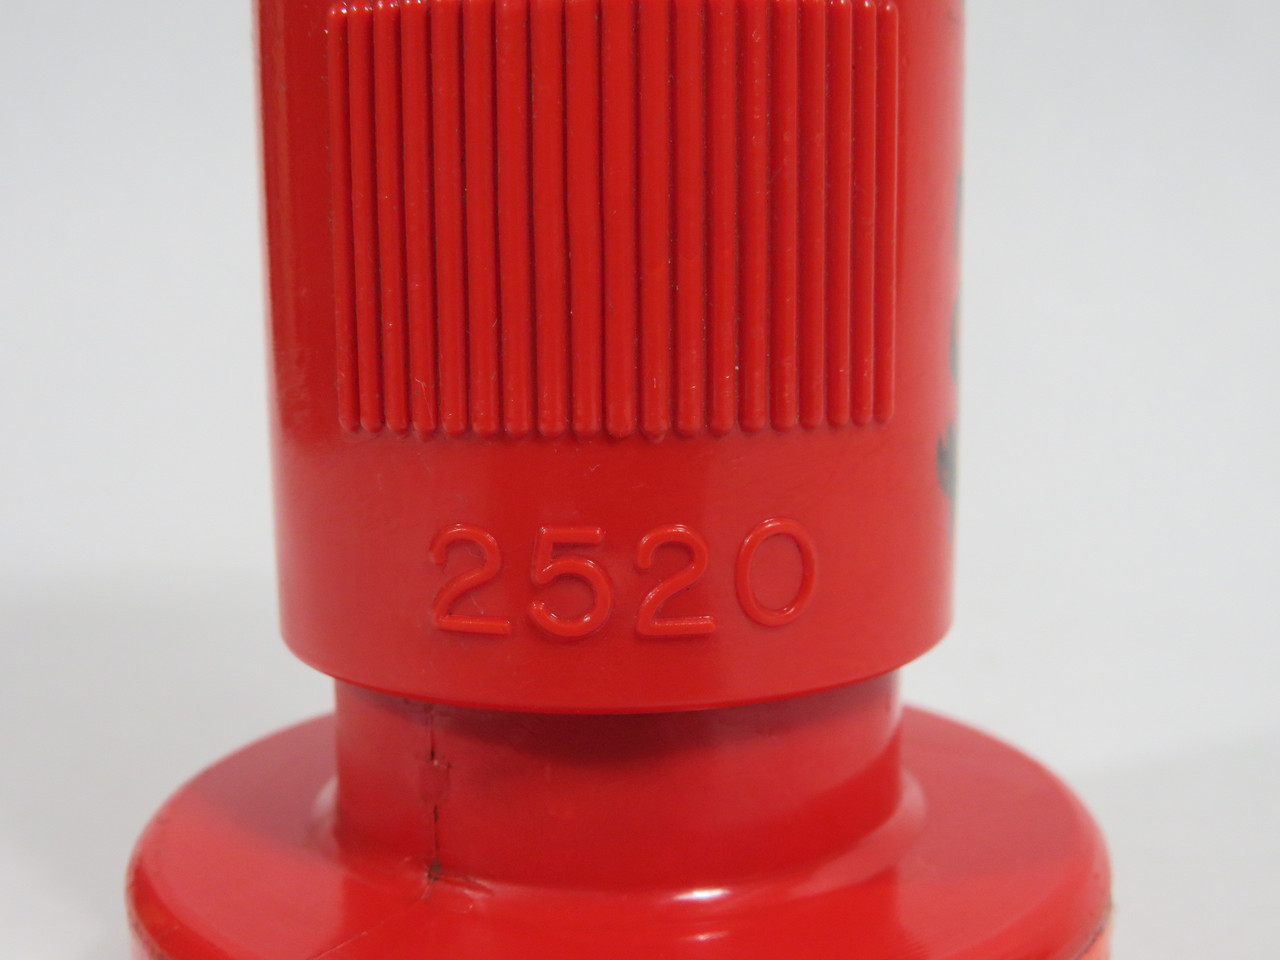 United Fire Safety 2520 Combination Fog/Spray Nozzle 2" NPSH MISSING GASKET USED